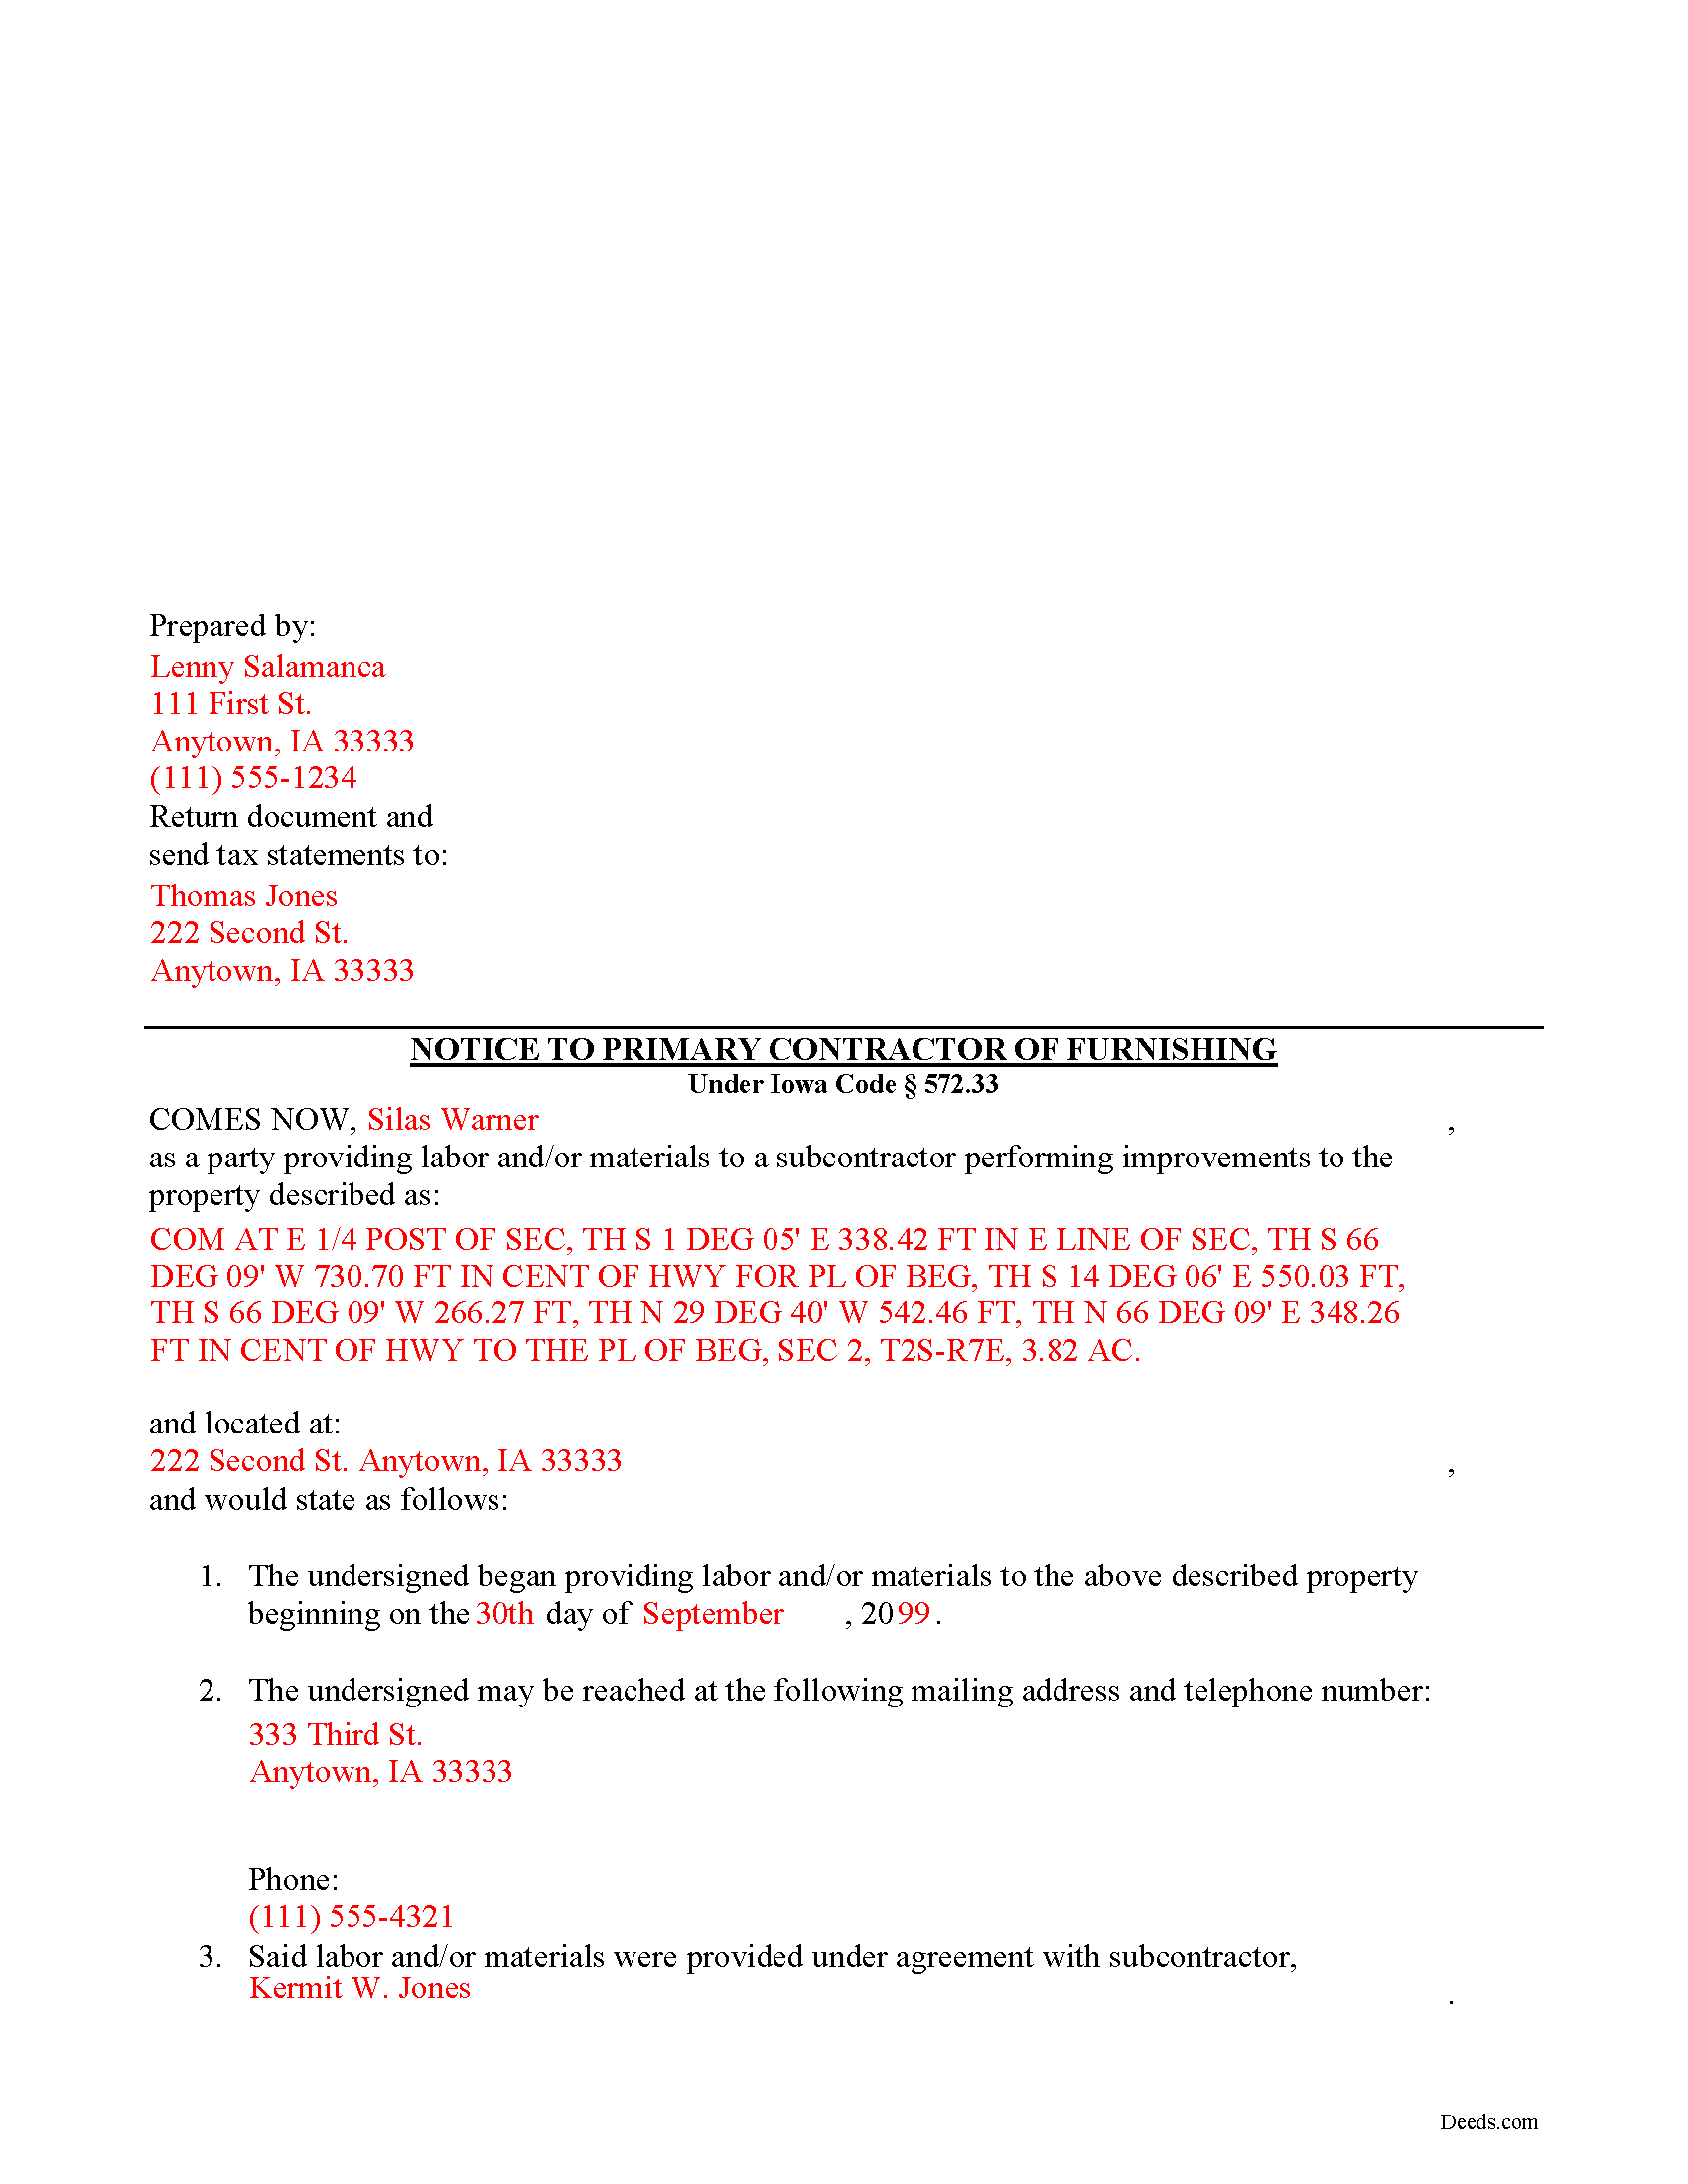 Completed Example of the Notice to Primary Contractor Document